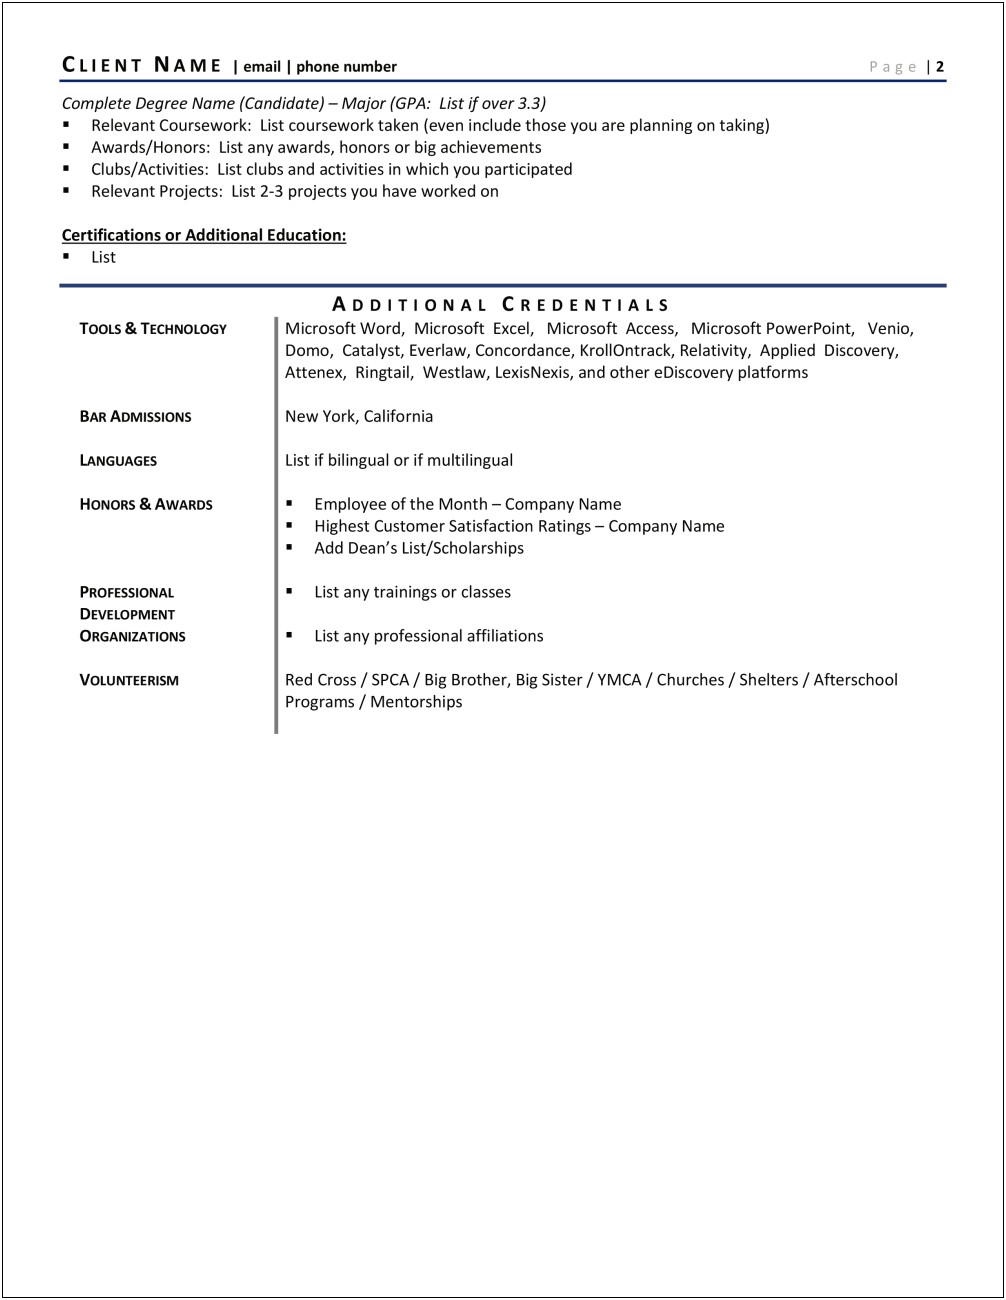 Job Resume Ideas For Legal Assistant